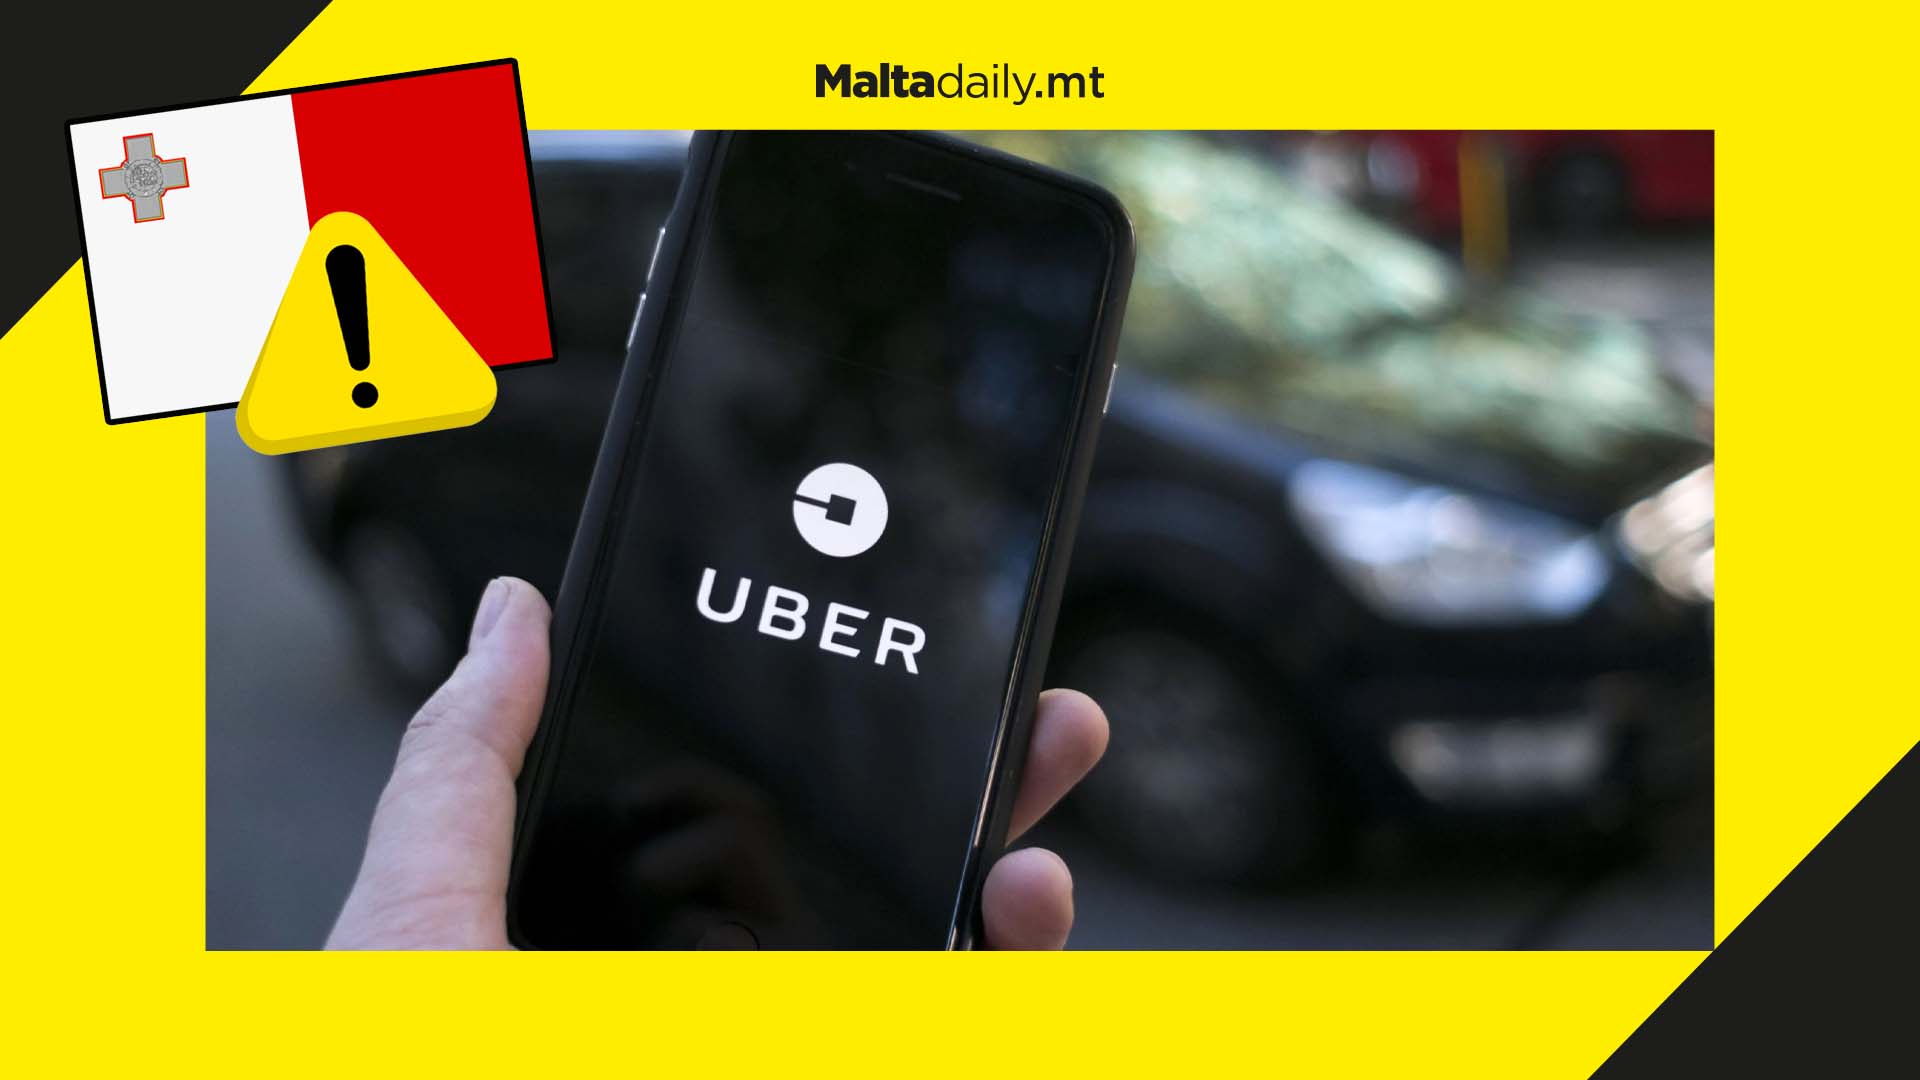 Uber officially available in Malta as of today